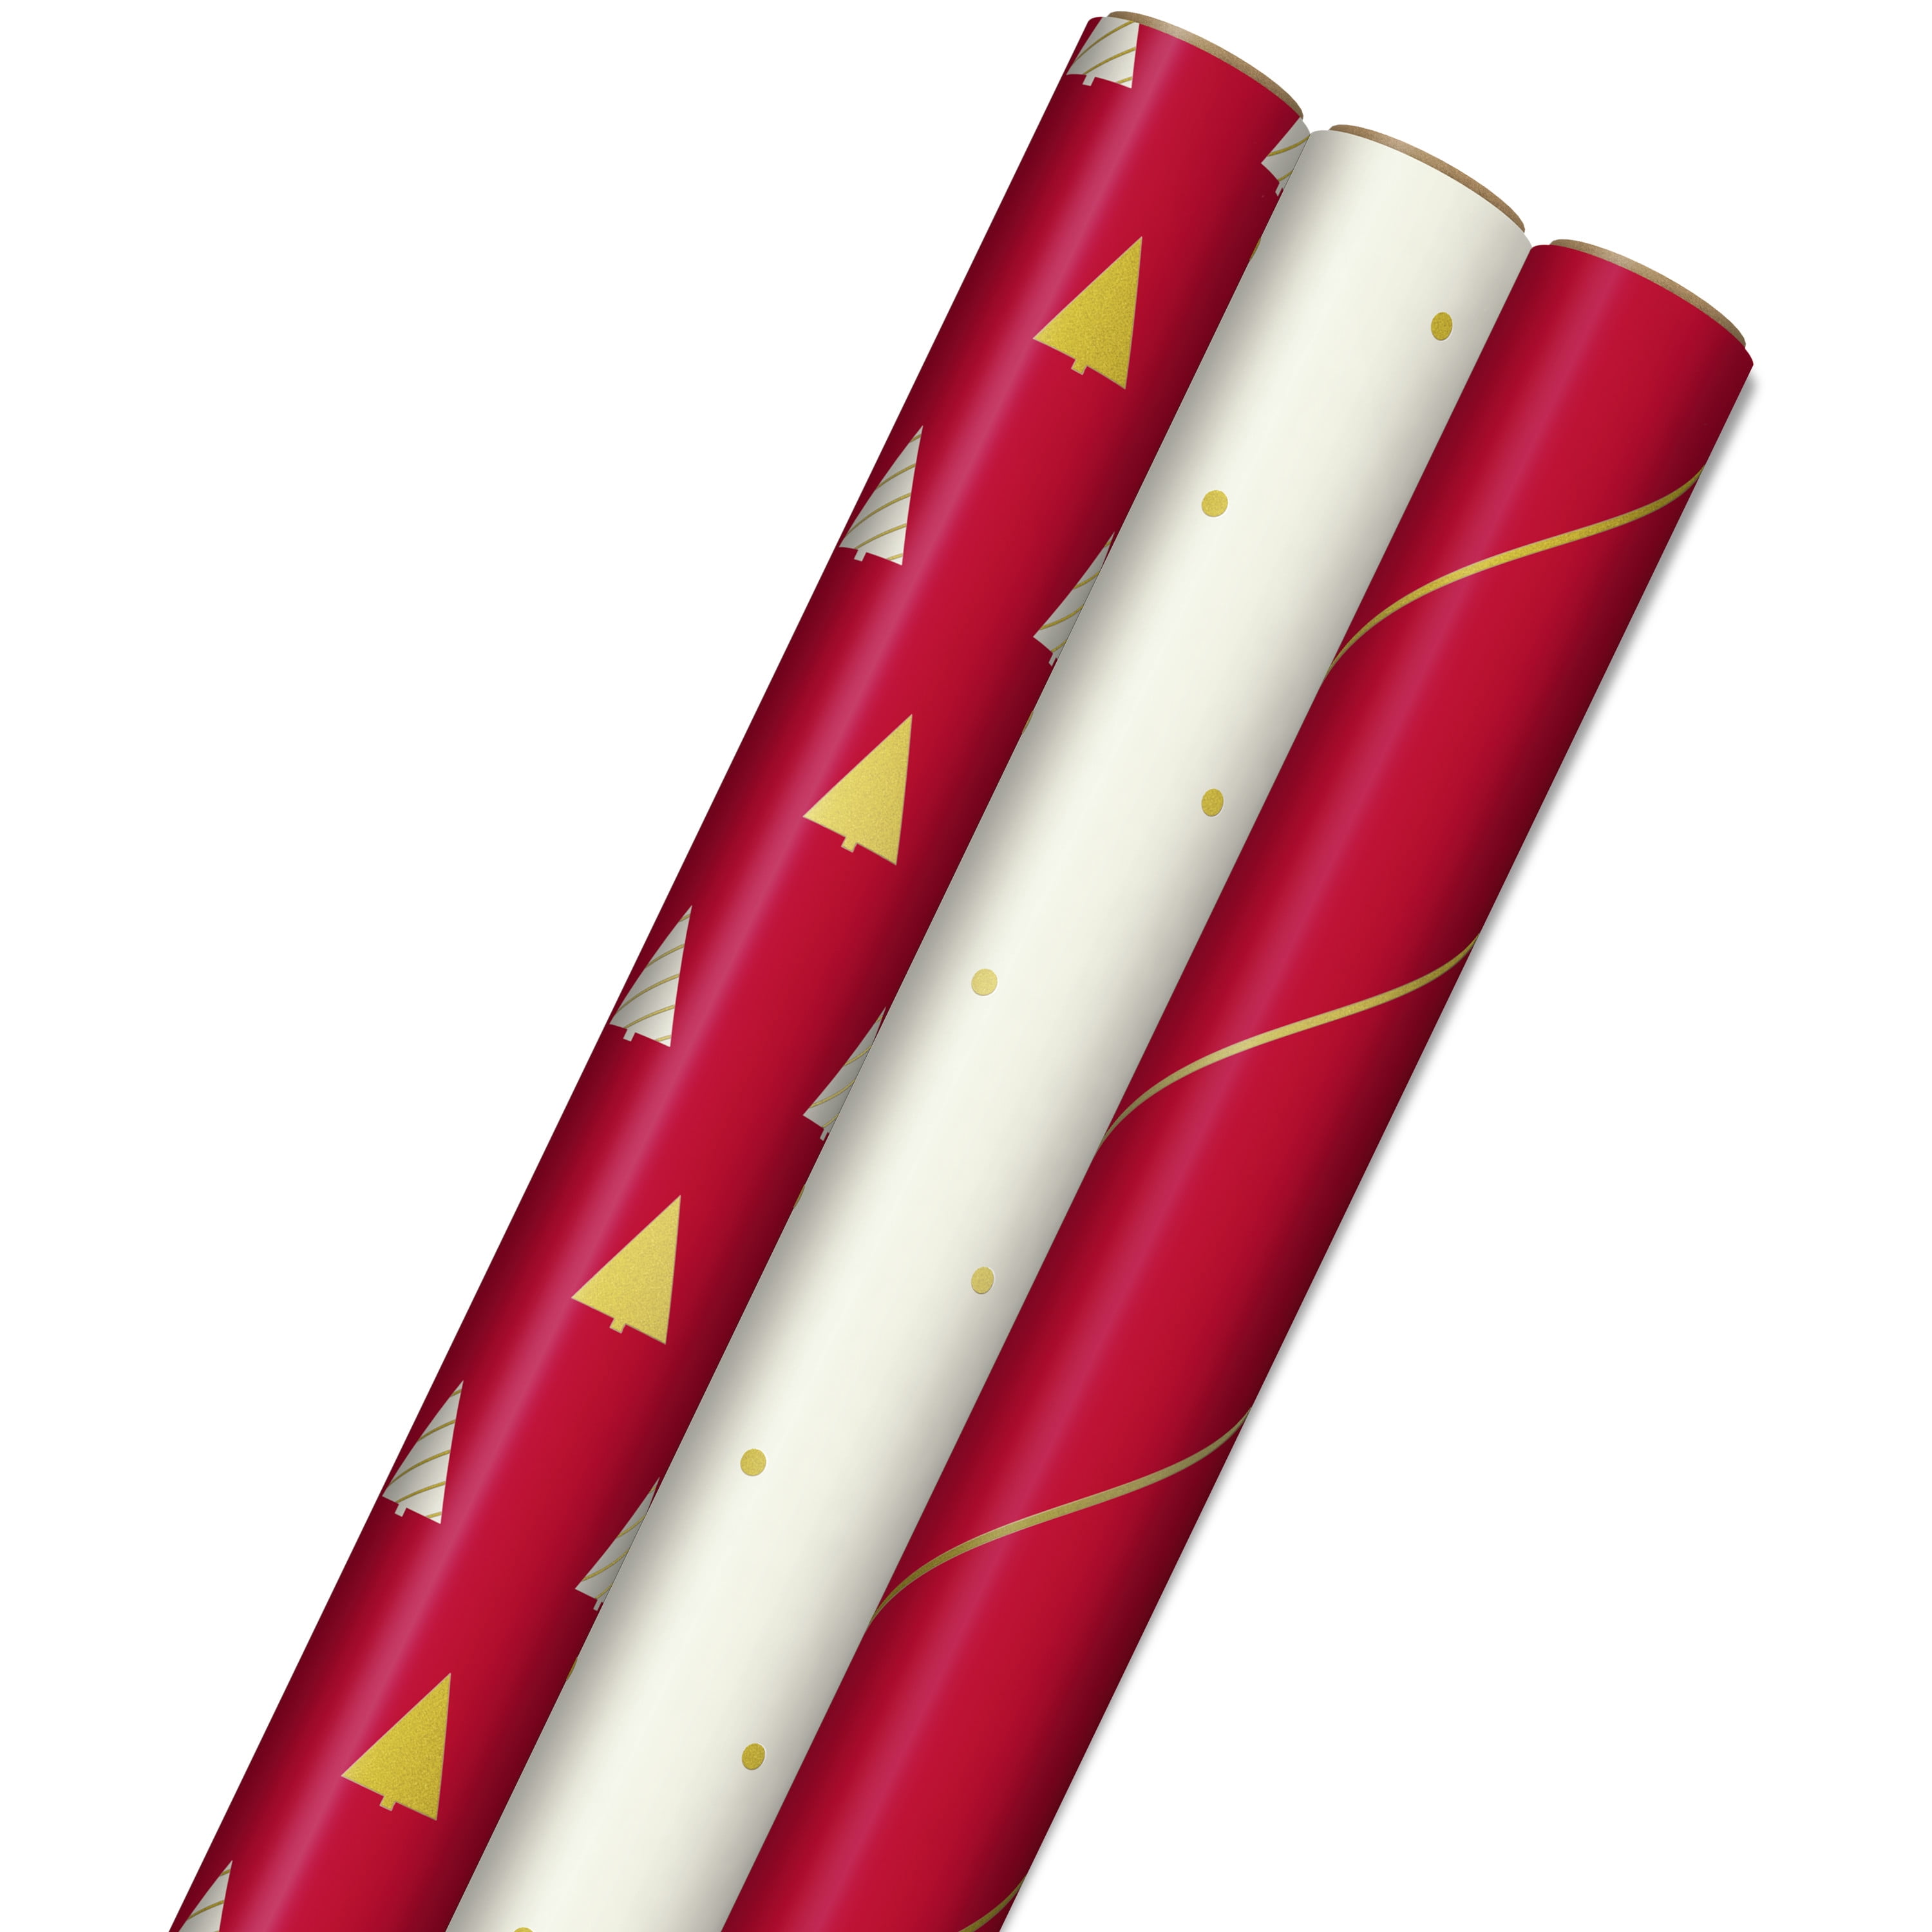 Cow Wrapping Paper Roll Or Folded By The Wrapping Paper Shop